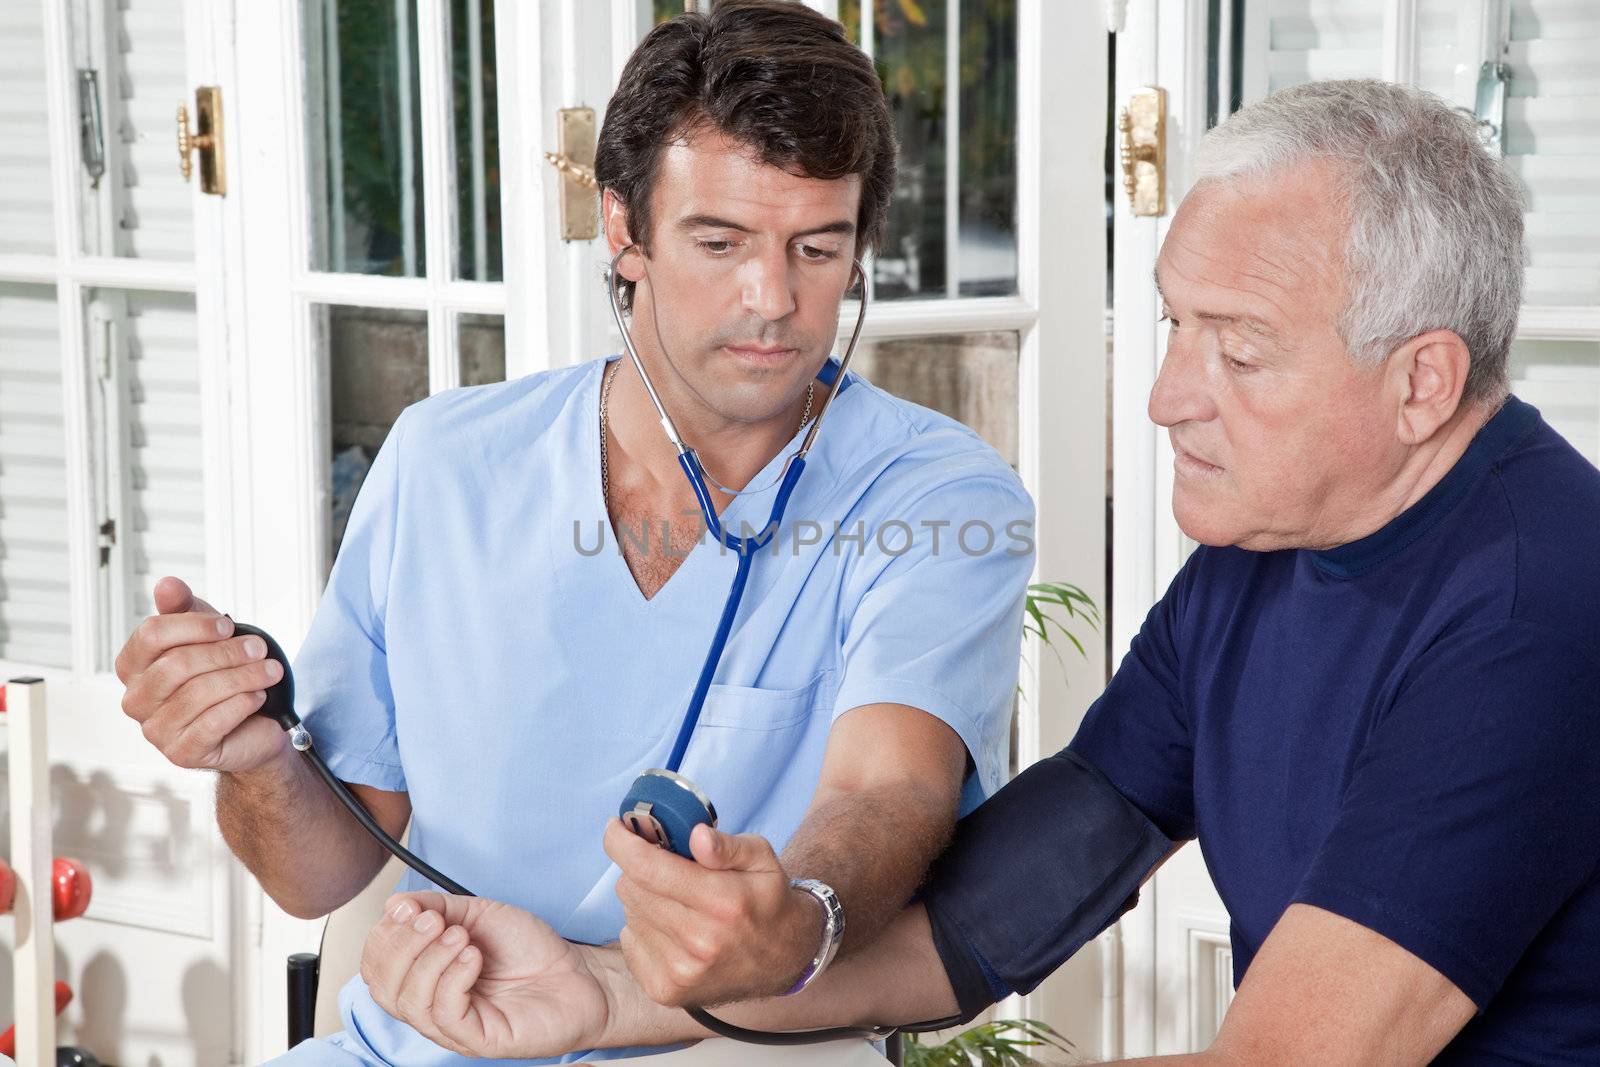 Doctor taking the blood pressure of a patient.